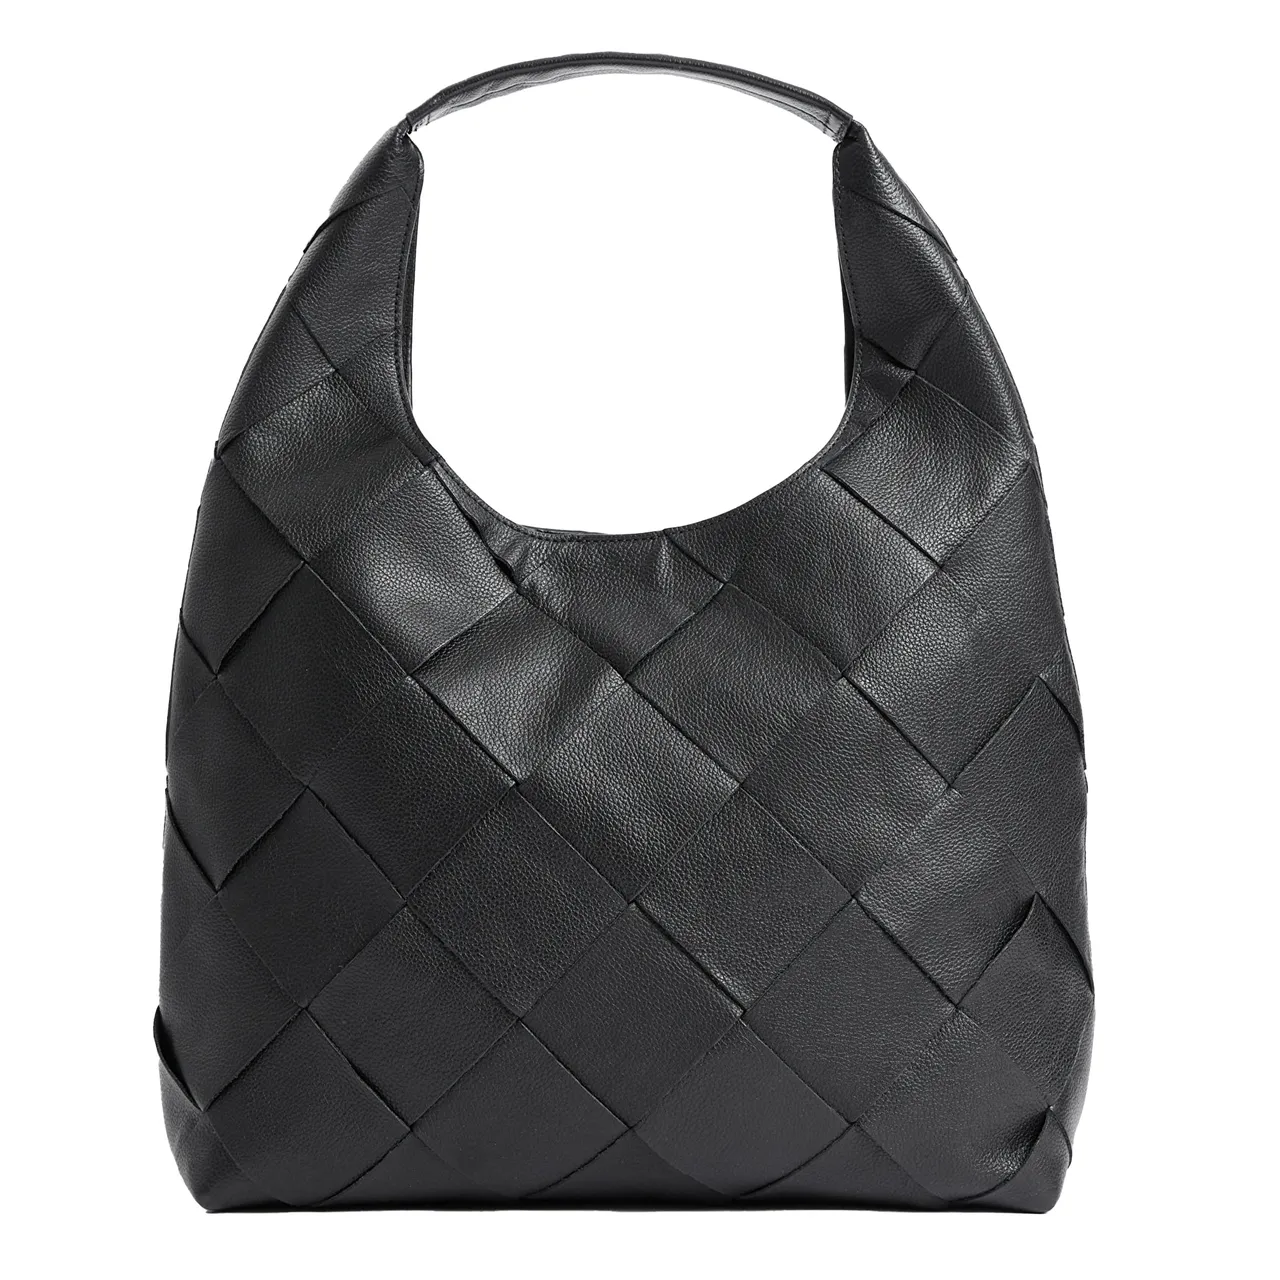 Braided black leather tote